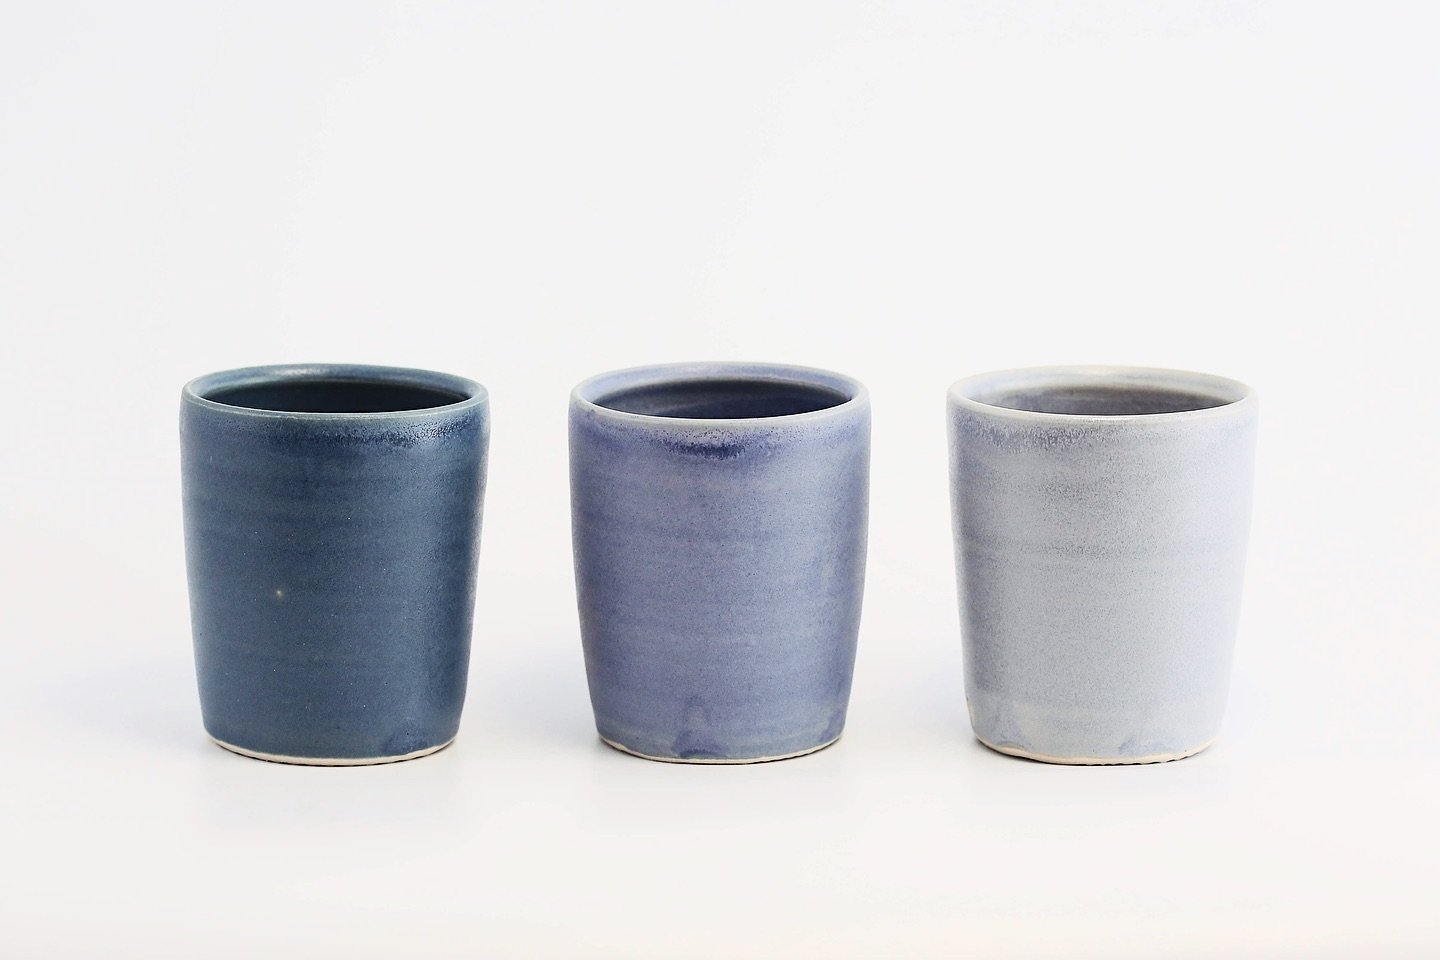 I&rsquo;ve tried this shape in many different shades of reds, yellows, pinks, whites etc. It&rsquo;s nice to fire some testers but after all that I think I might just stick with blues 😅

#handmadepottery #coffeetumbler #blueglaze #dolomiteglaze #whe